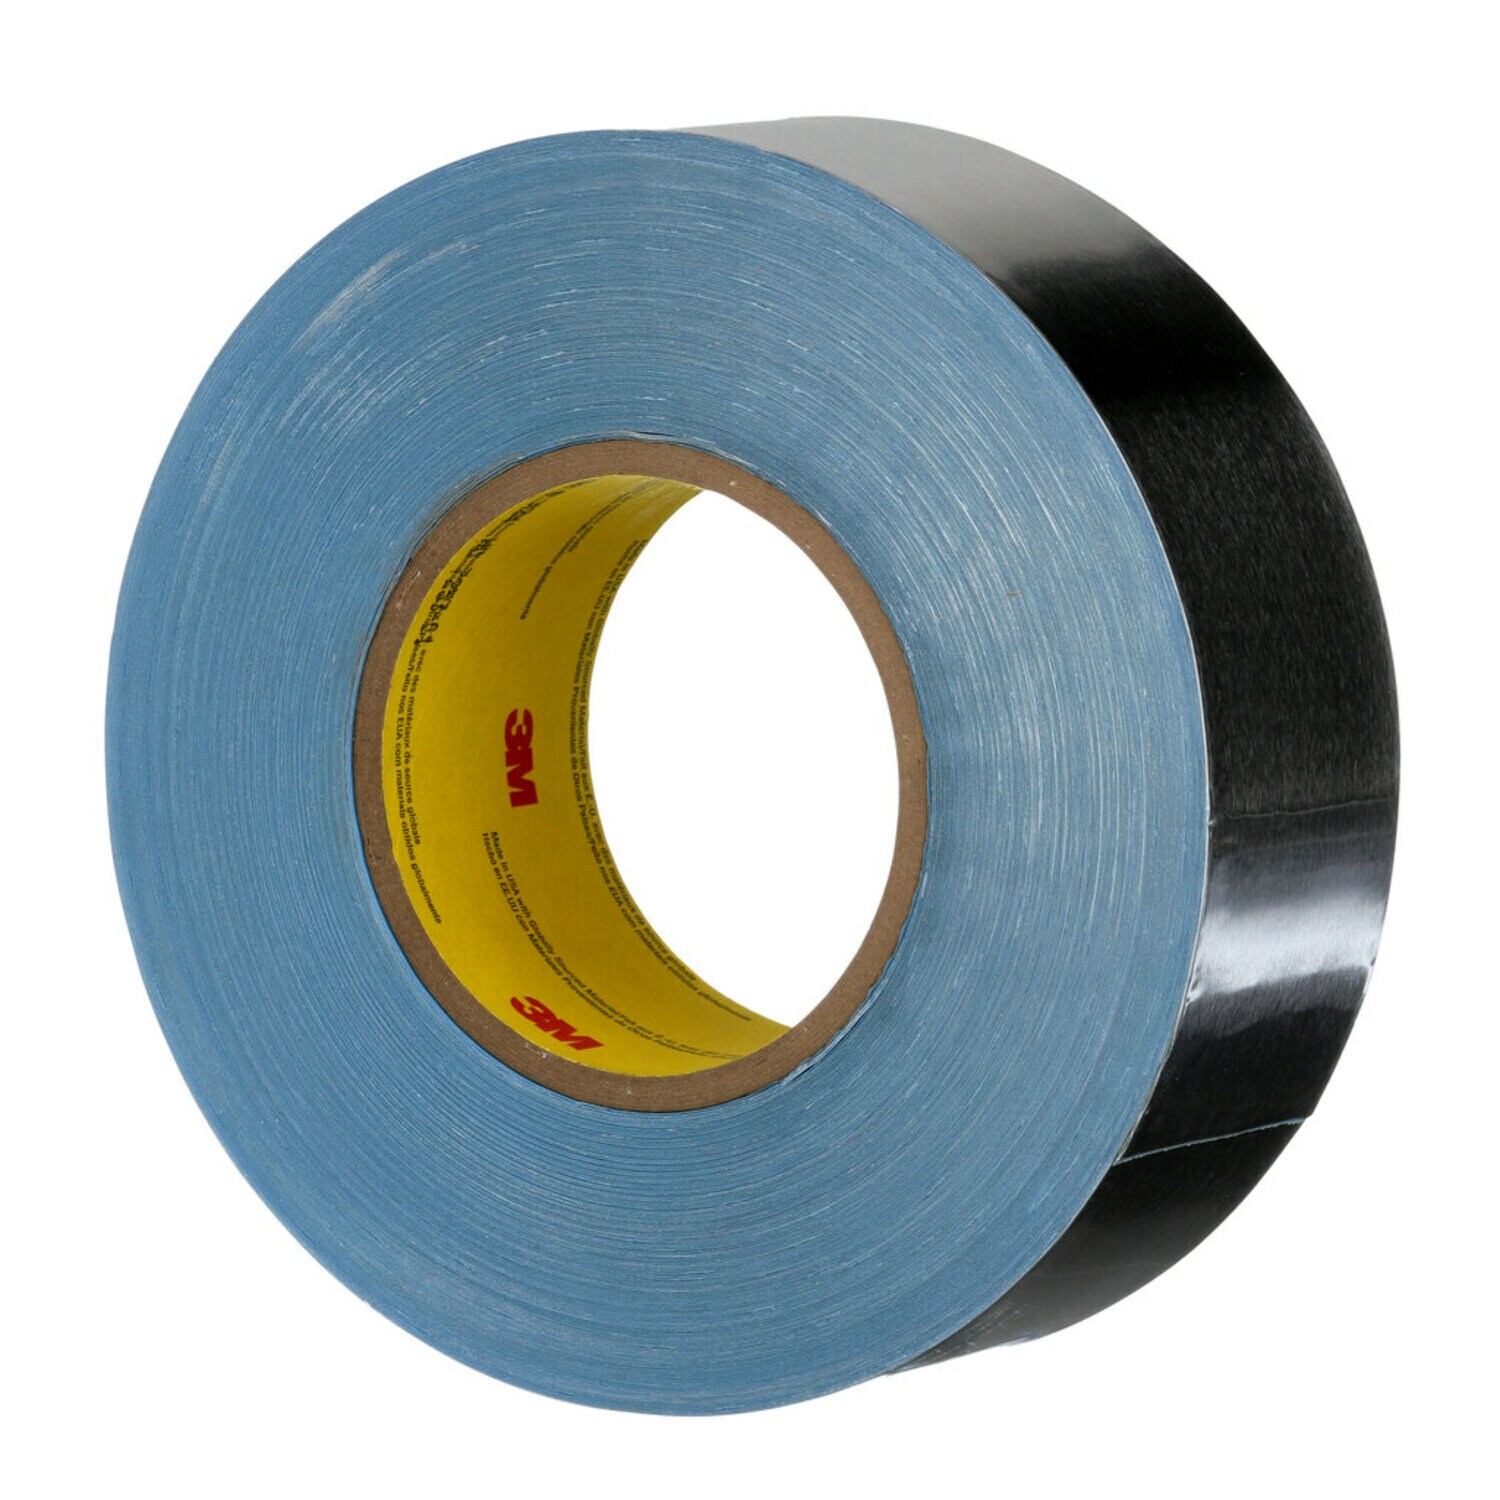 7000049095 - 3M Vibration Damping Tape 434, Silver, 2.75 in x 60 yd, 7.5 mil, 4
Rolls/Case